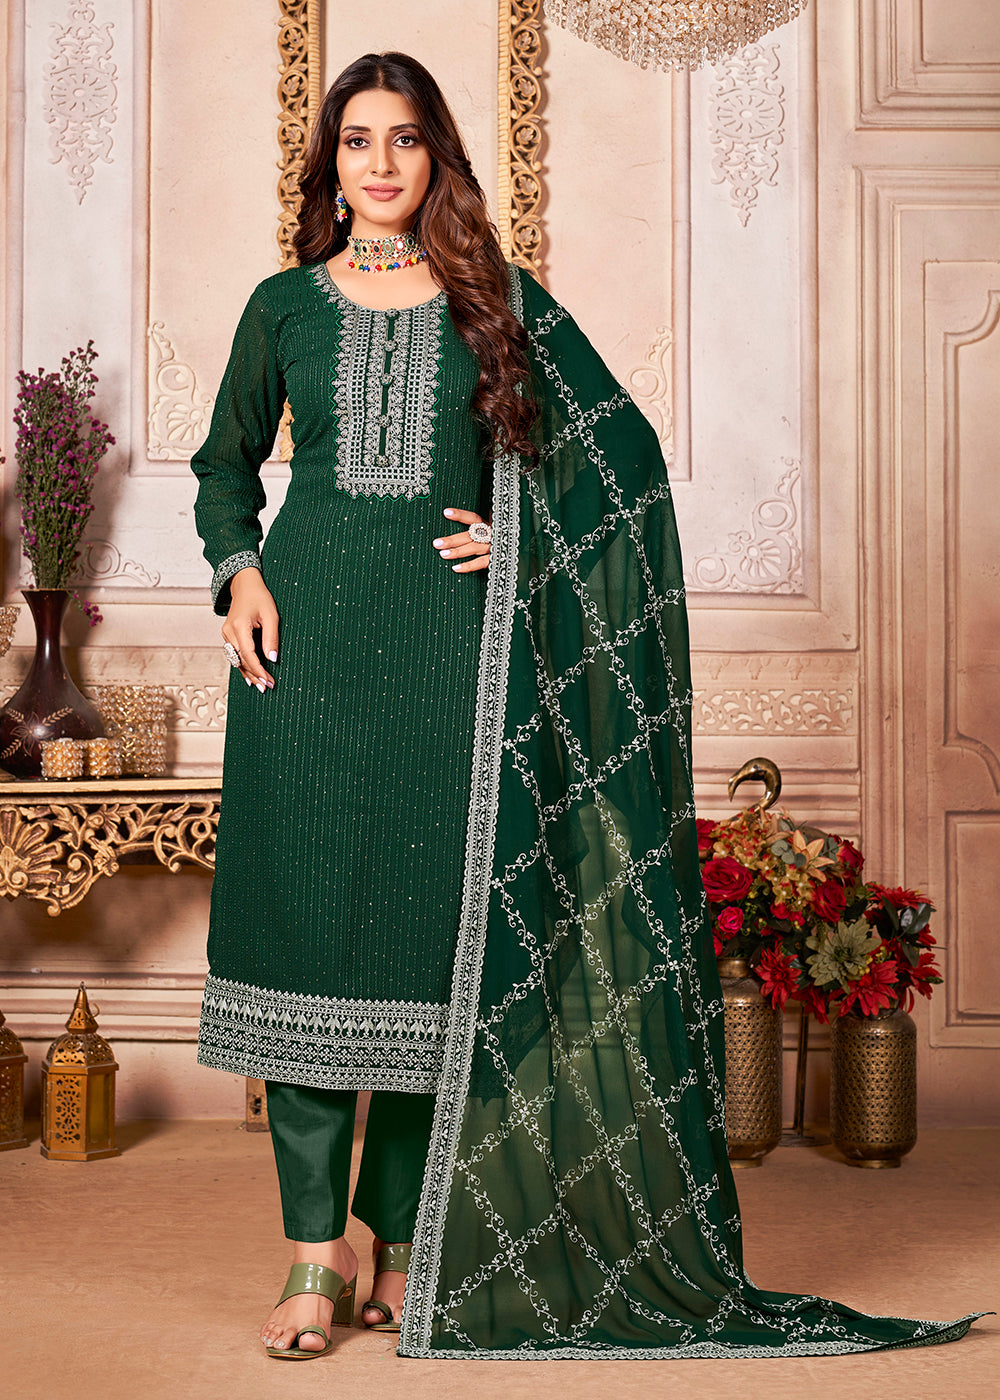 Buy Now Marvelous Green Indian Georgette Ceremonial Salwar Suit Online in USA, UK, Canada & Worldwide at Empress Clothing.